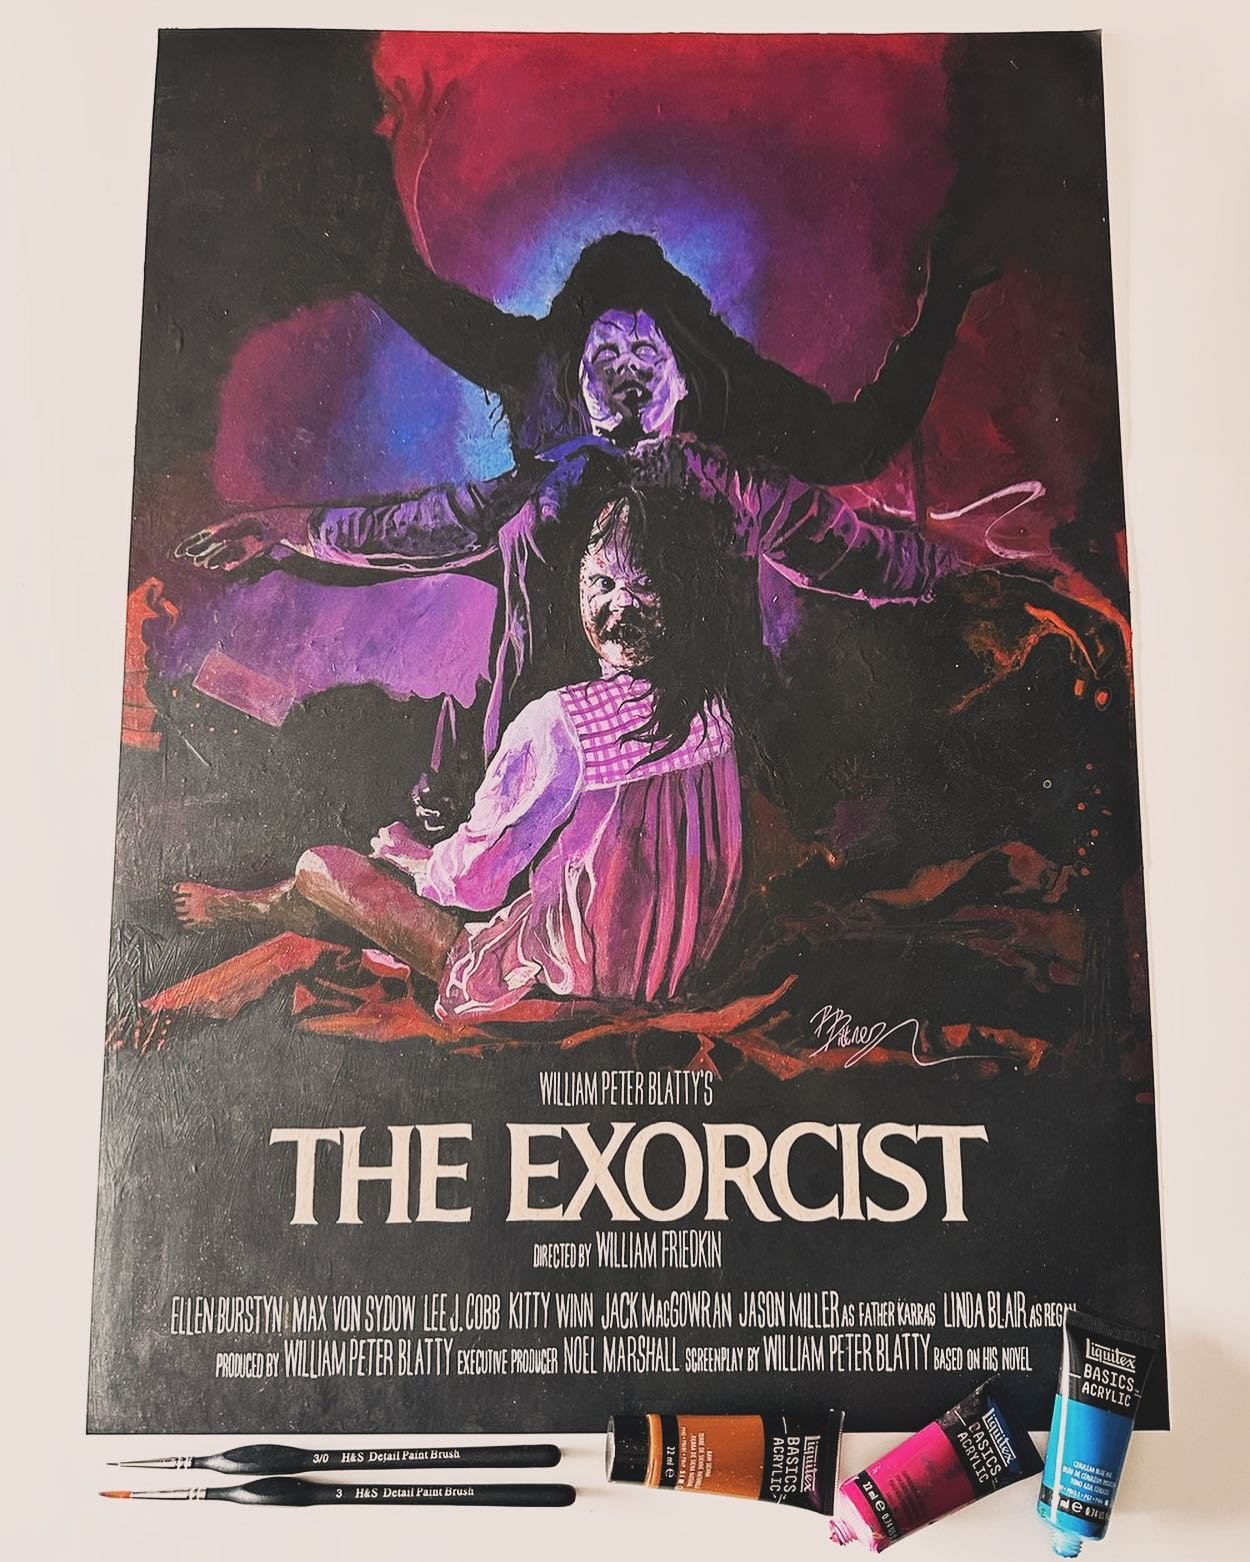 Painting I made for The Exorcist; acrylic on paper. There&rsquo;s currently an offer on this original on my website! 👹🤮

Size: 42 x 59.4cm (A2). Free worldwide shipping. 

#theexorcist #exorcist #horror #horrorart #horrorartist #horrorartwork #horr